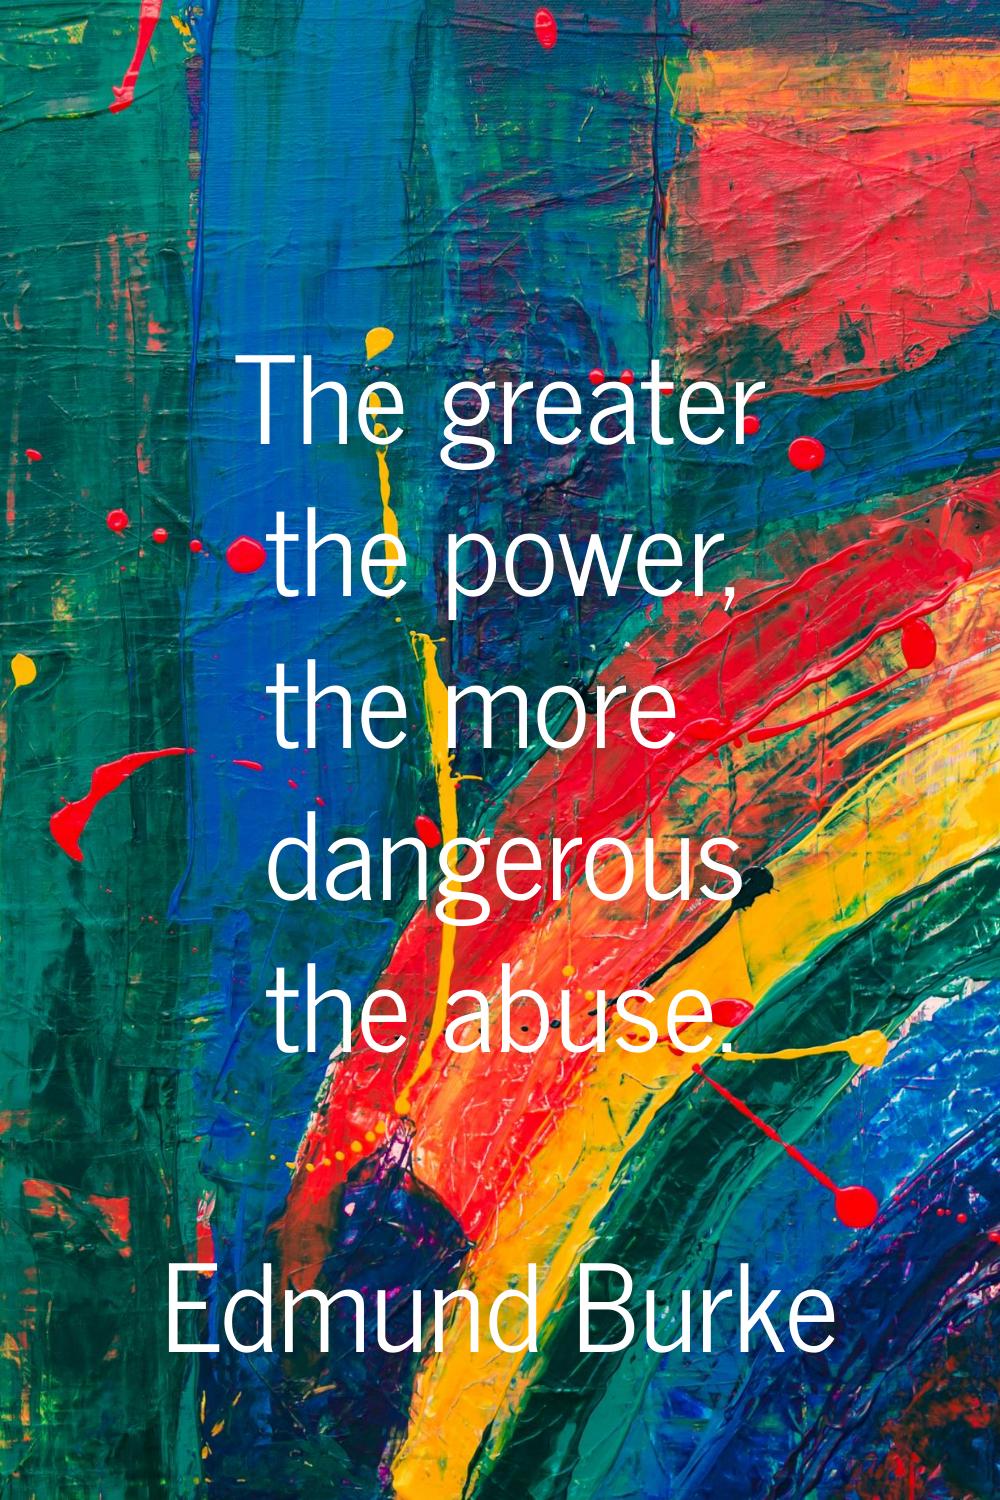 The greater the power, the more dangerous the abuse.